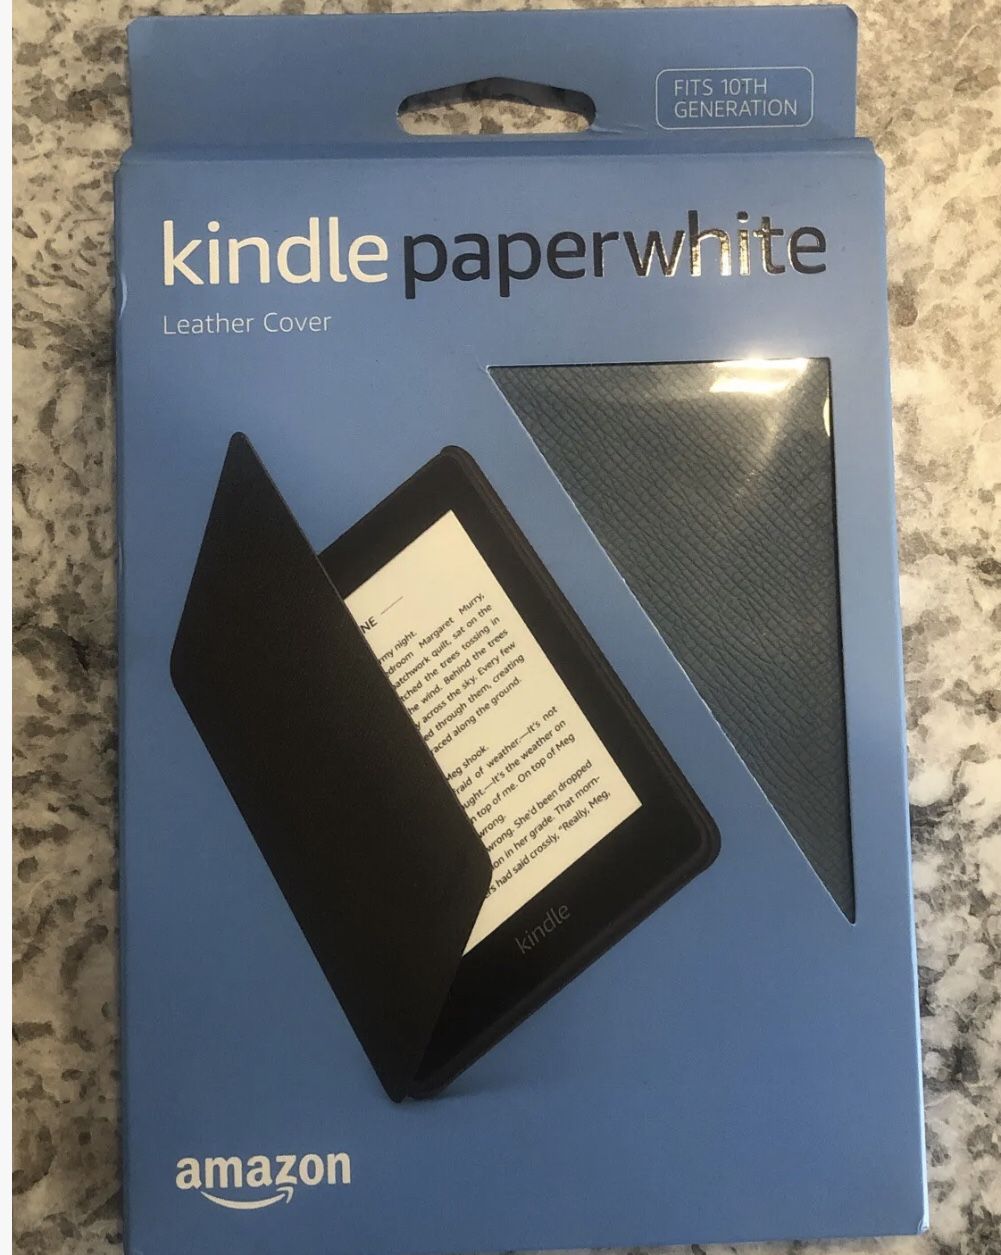 Amazon kindle paper white leather cover fits 10Th generation 